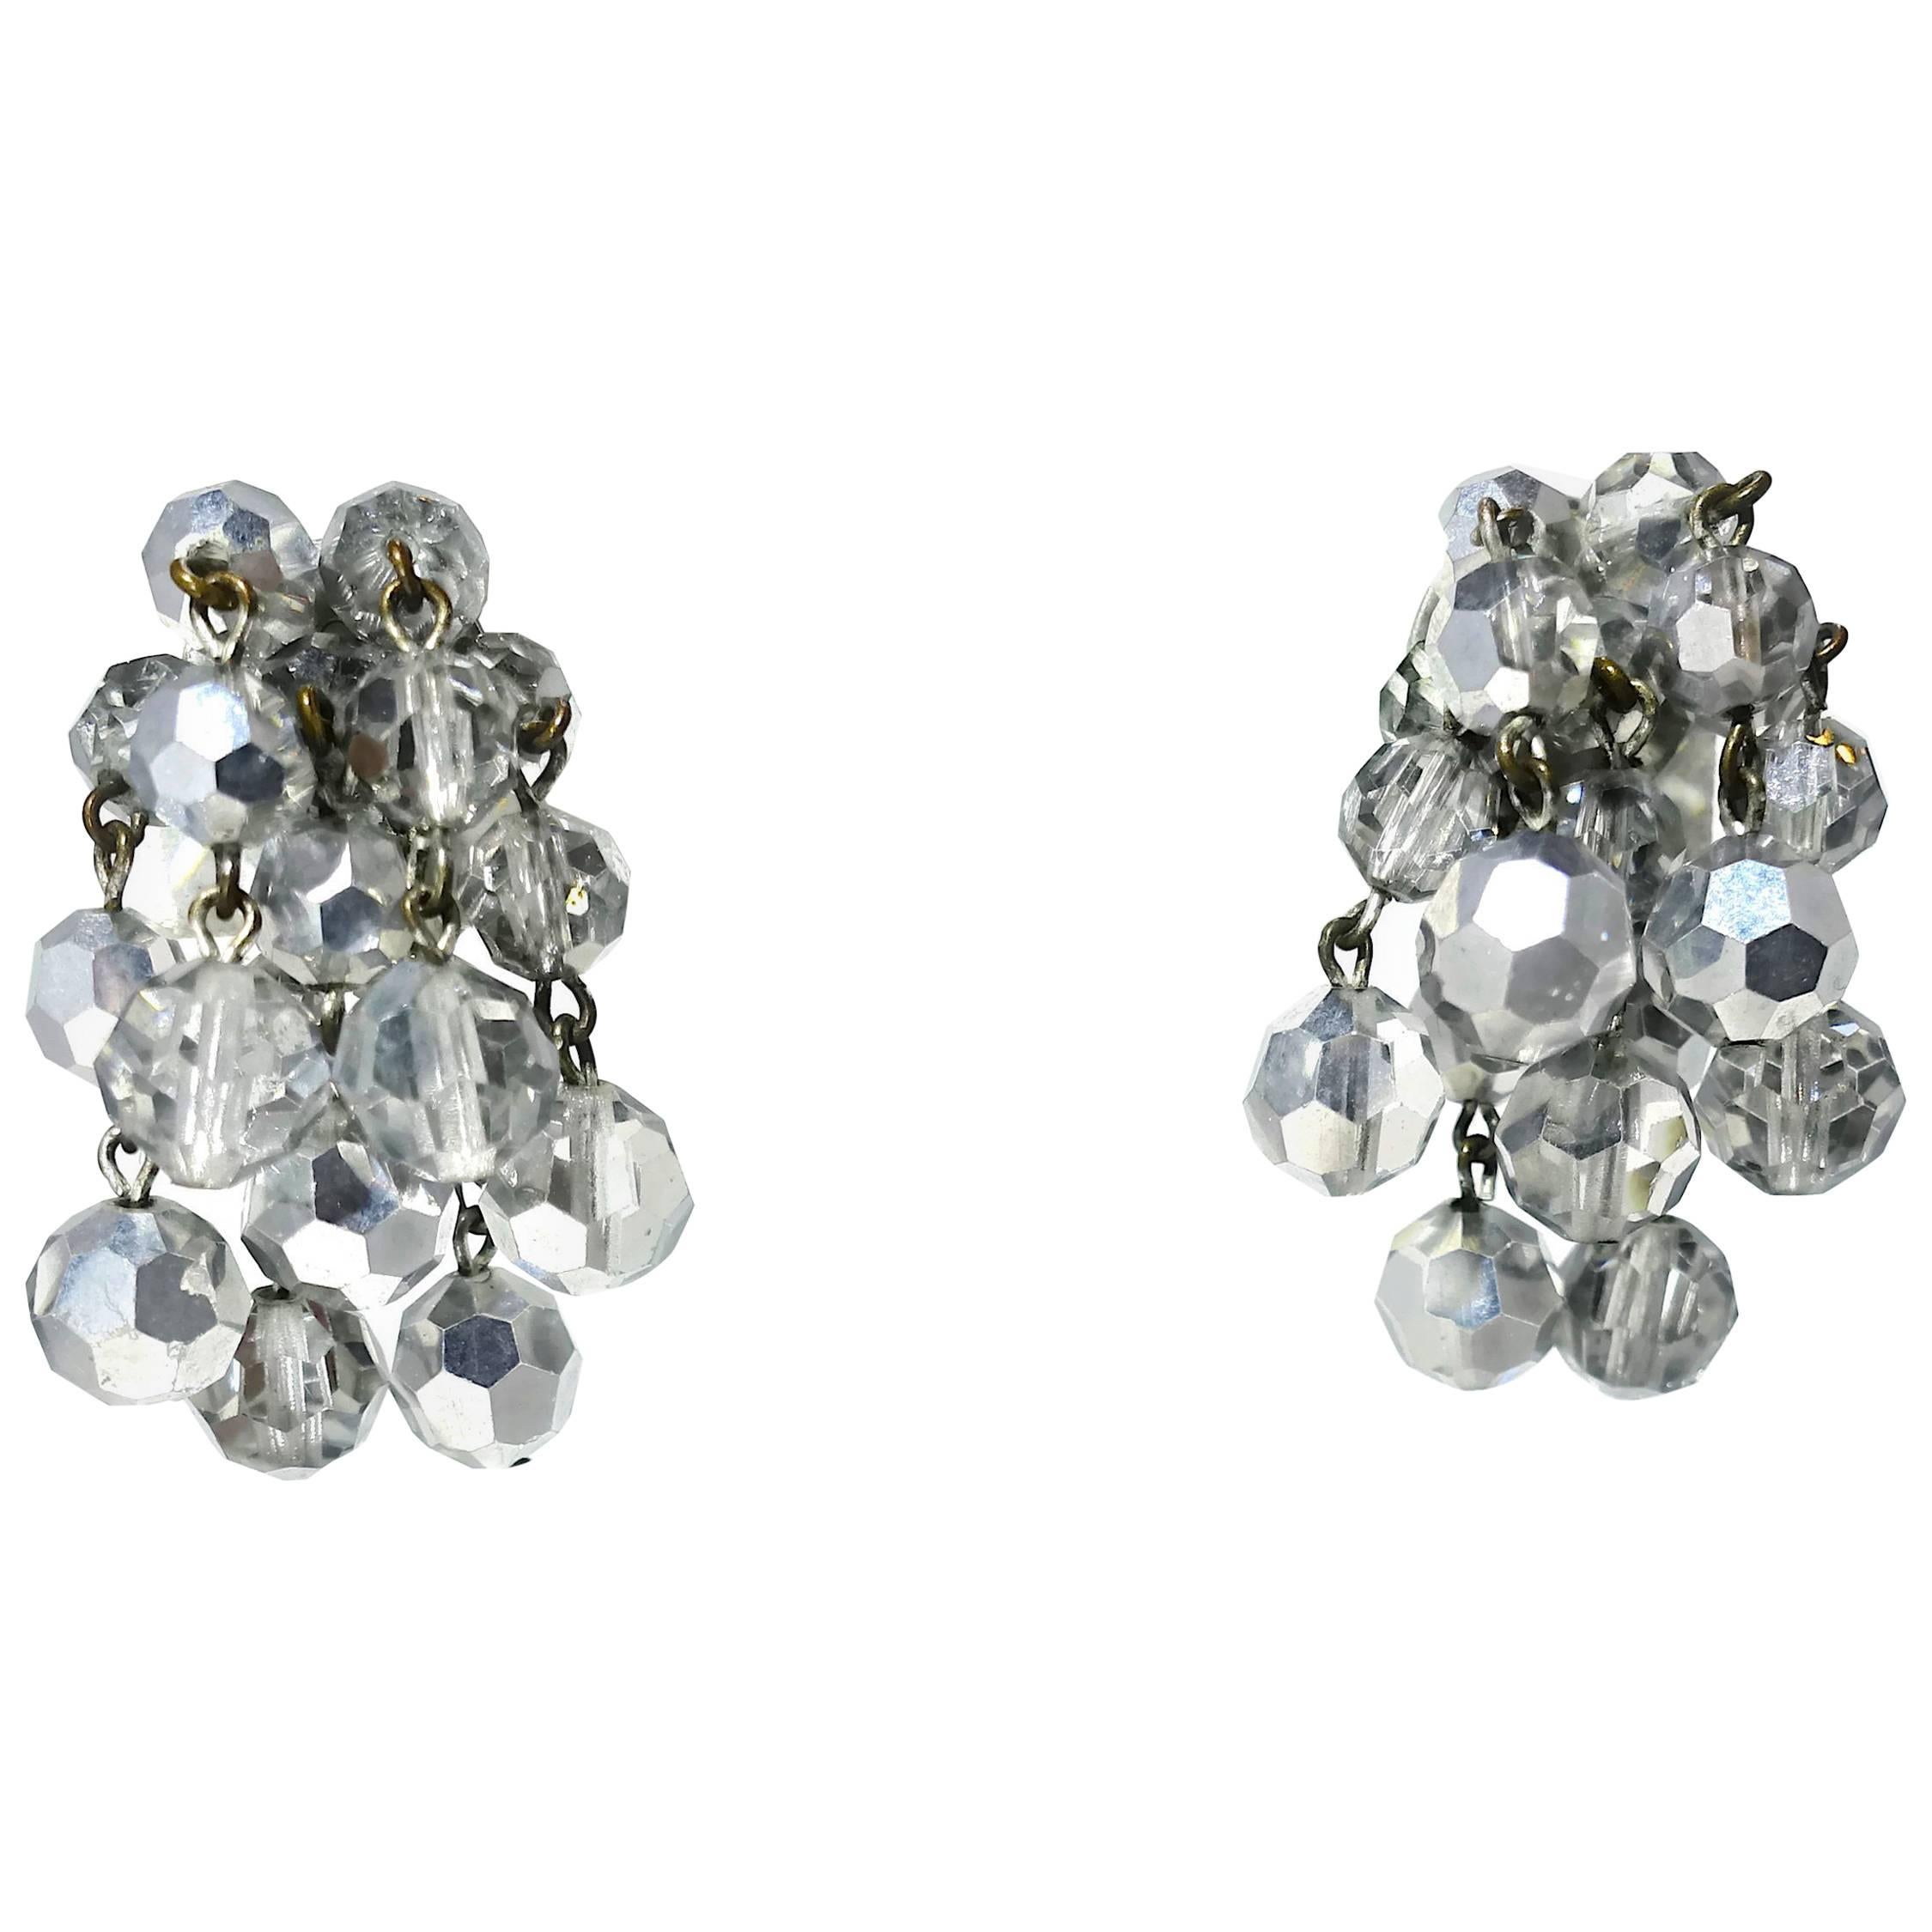 Vintage Silver Color Beads Dandle Earrings For Sale